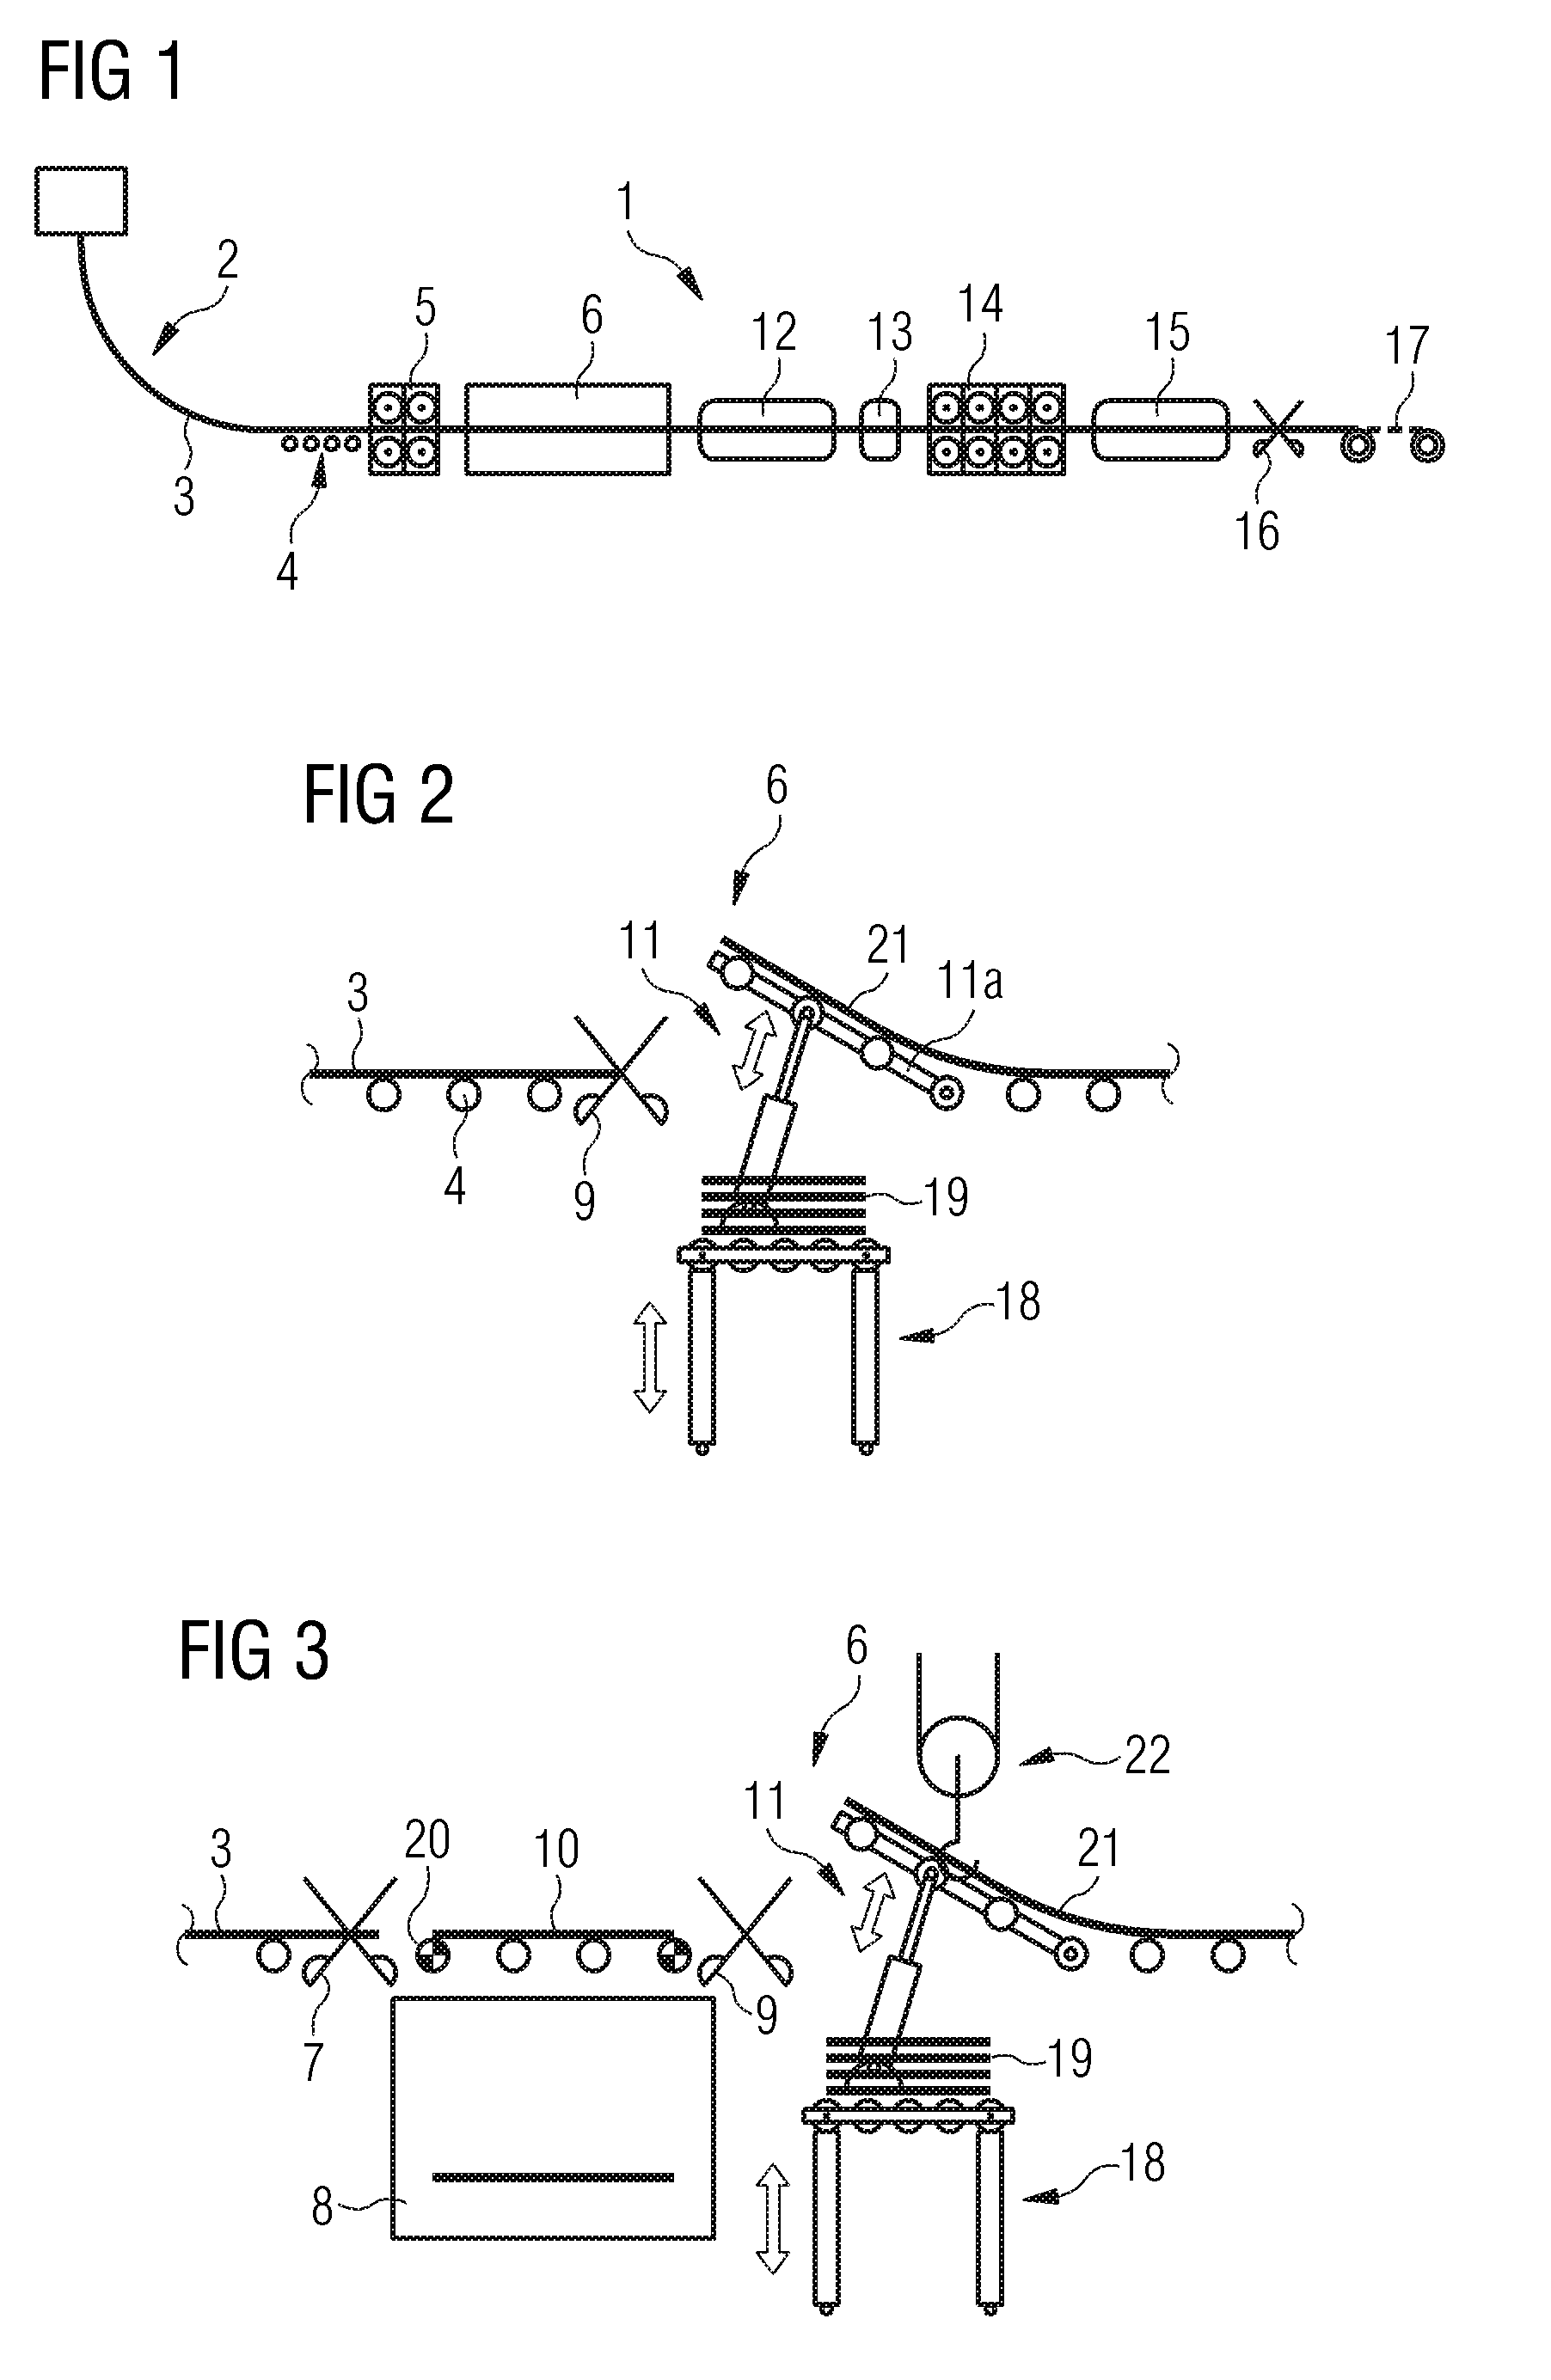 Process and apparatus for a combined casting and rolling installation